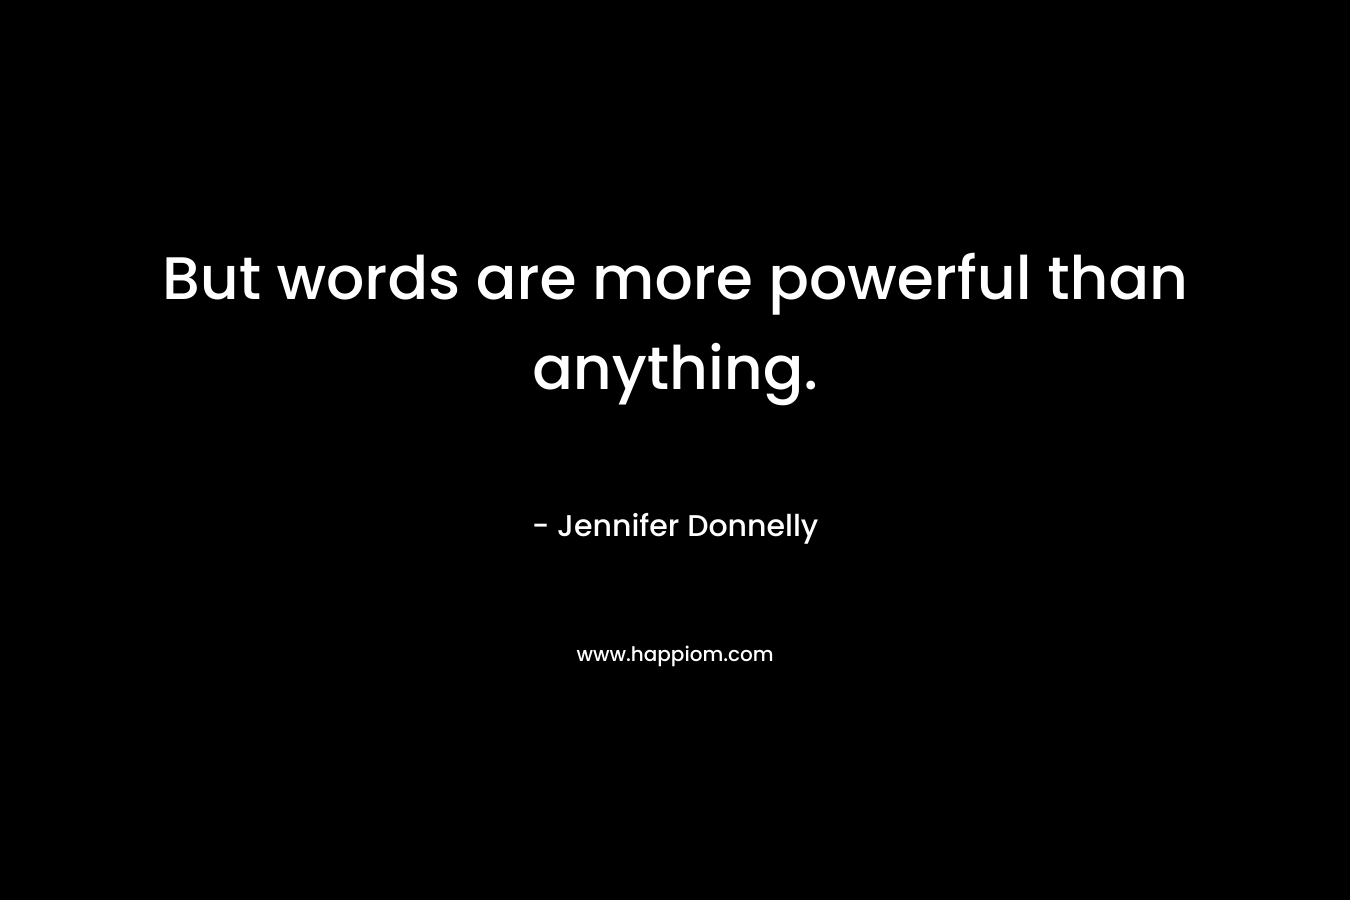 But words are more powerful than anything.